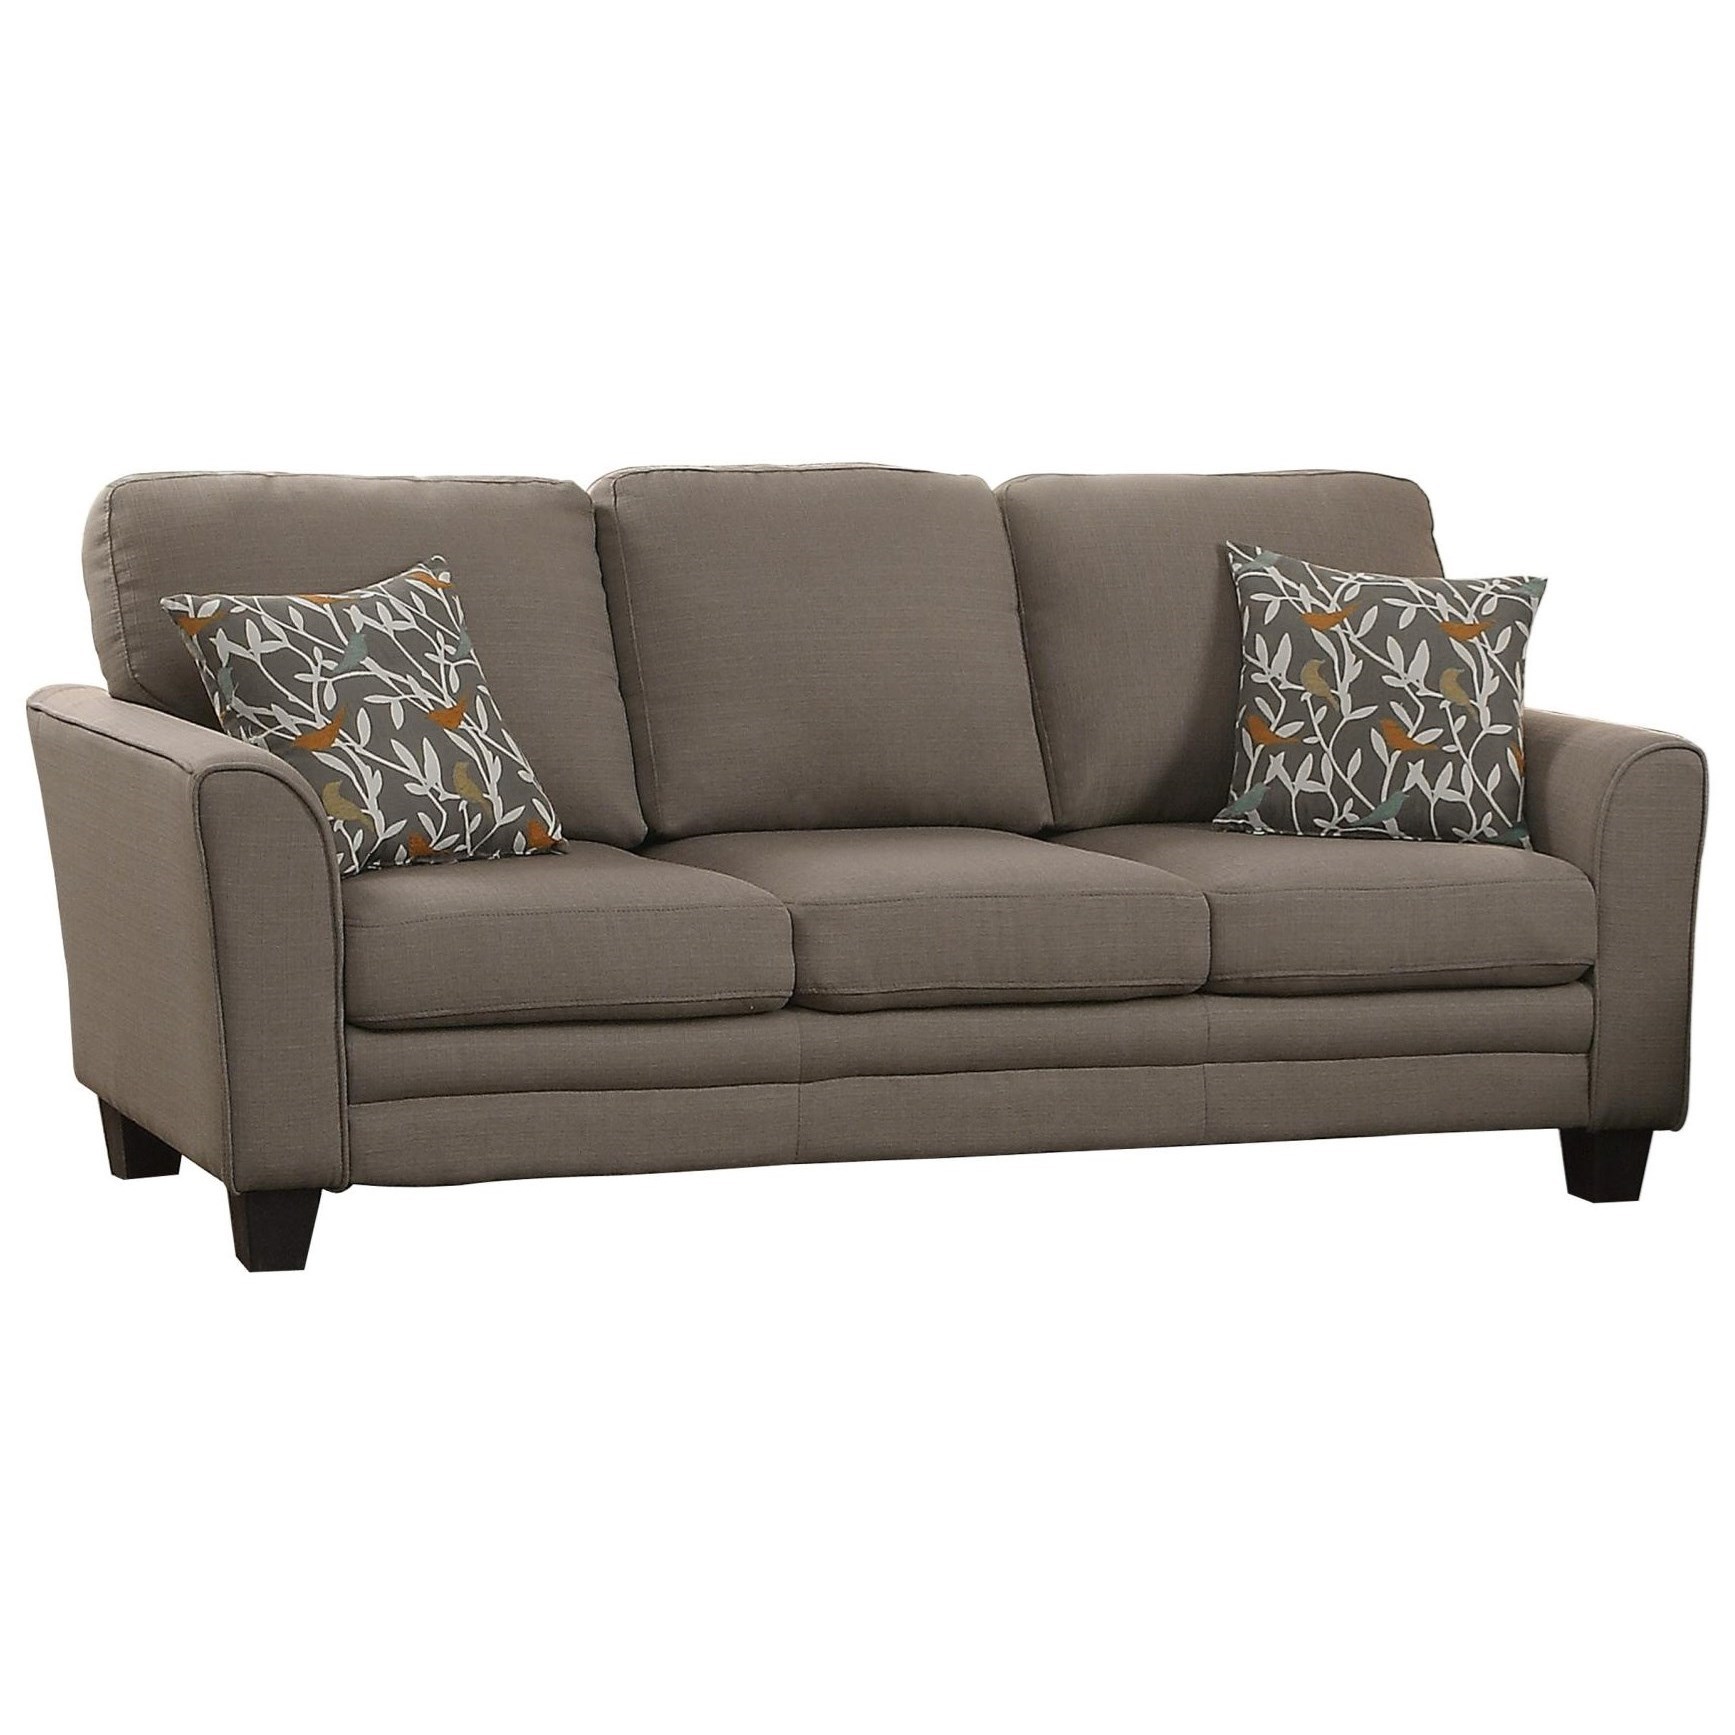 adairs fold out couch